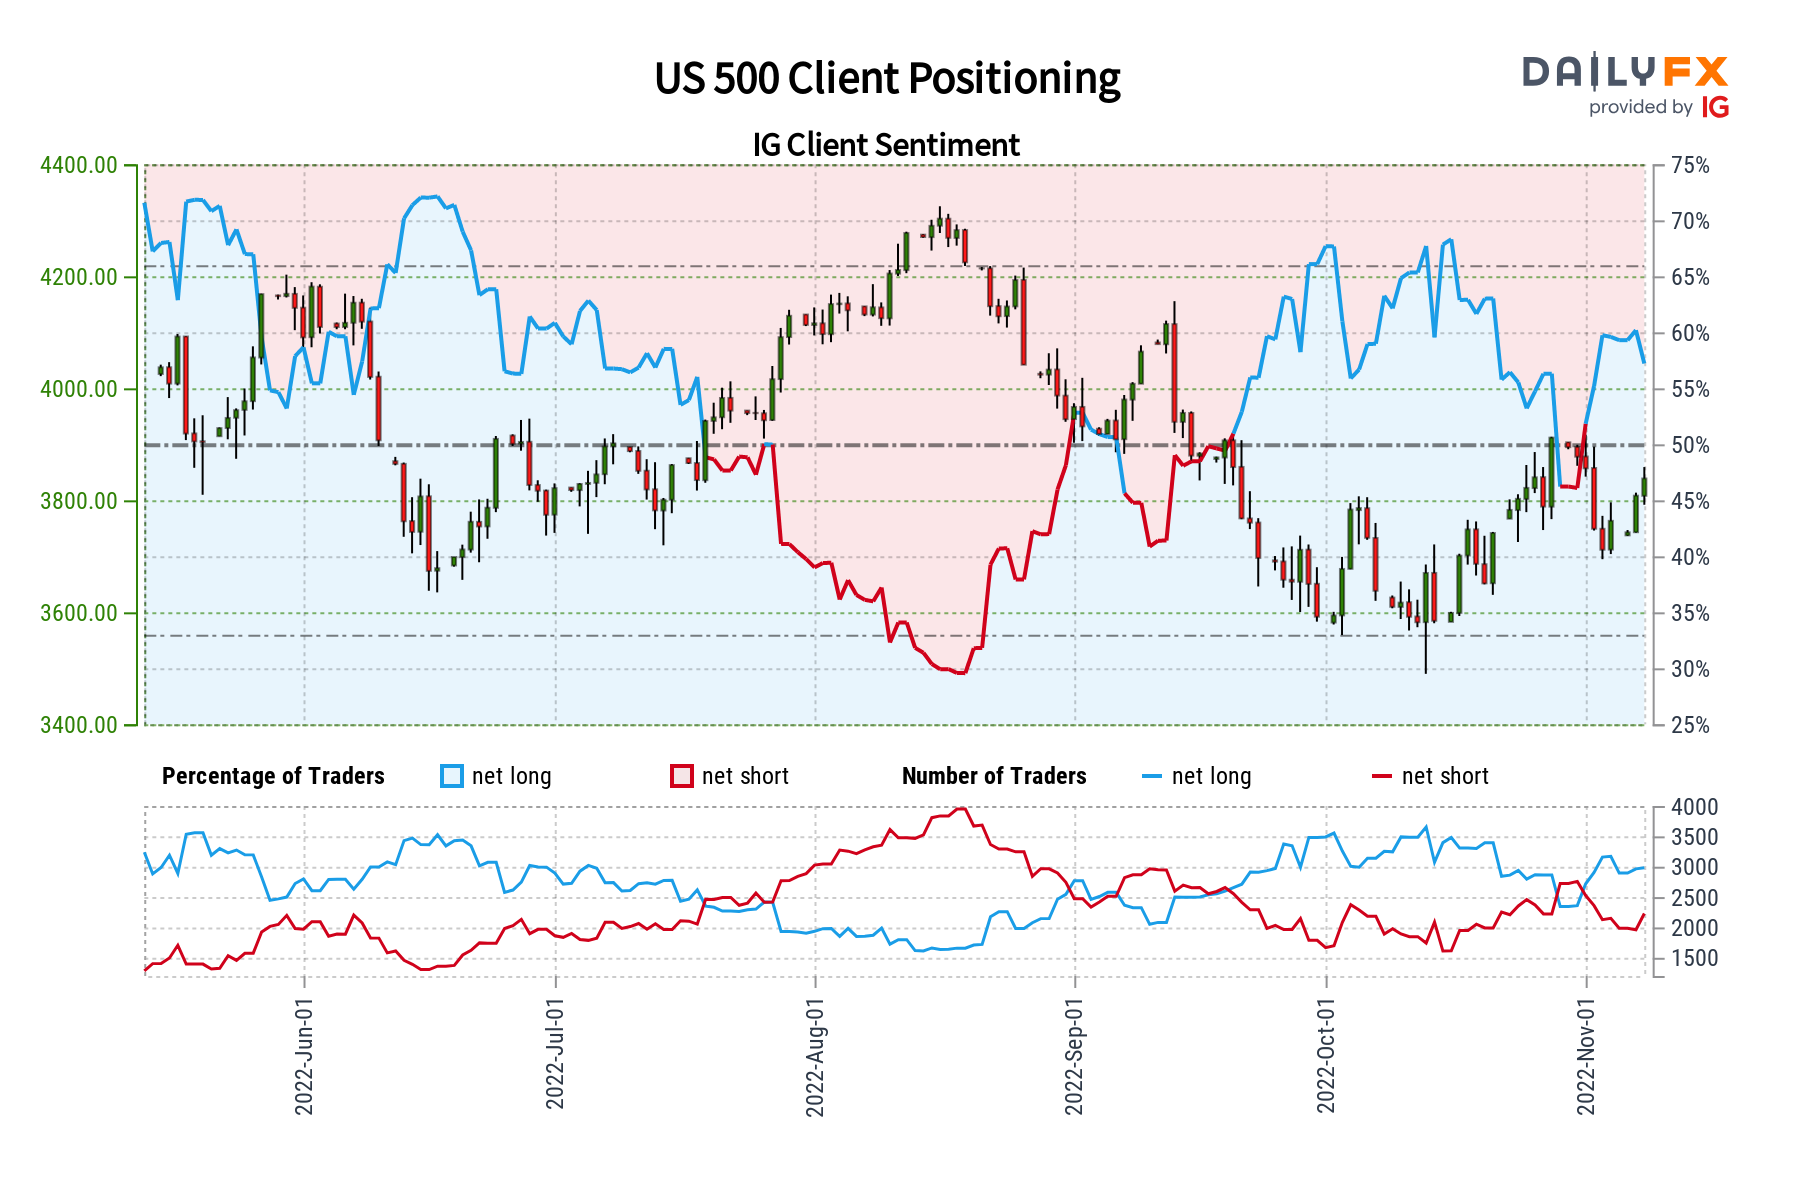 S&P 500 Sentiment Outlook - Mixed